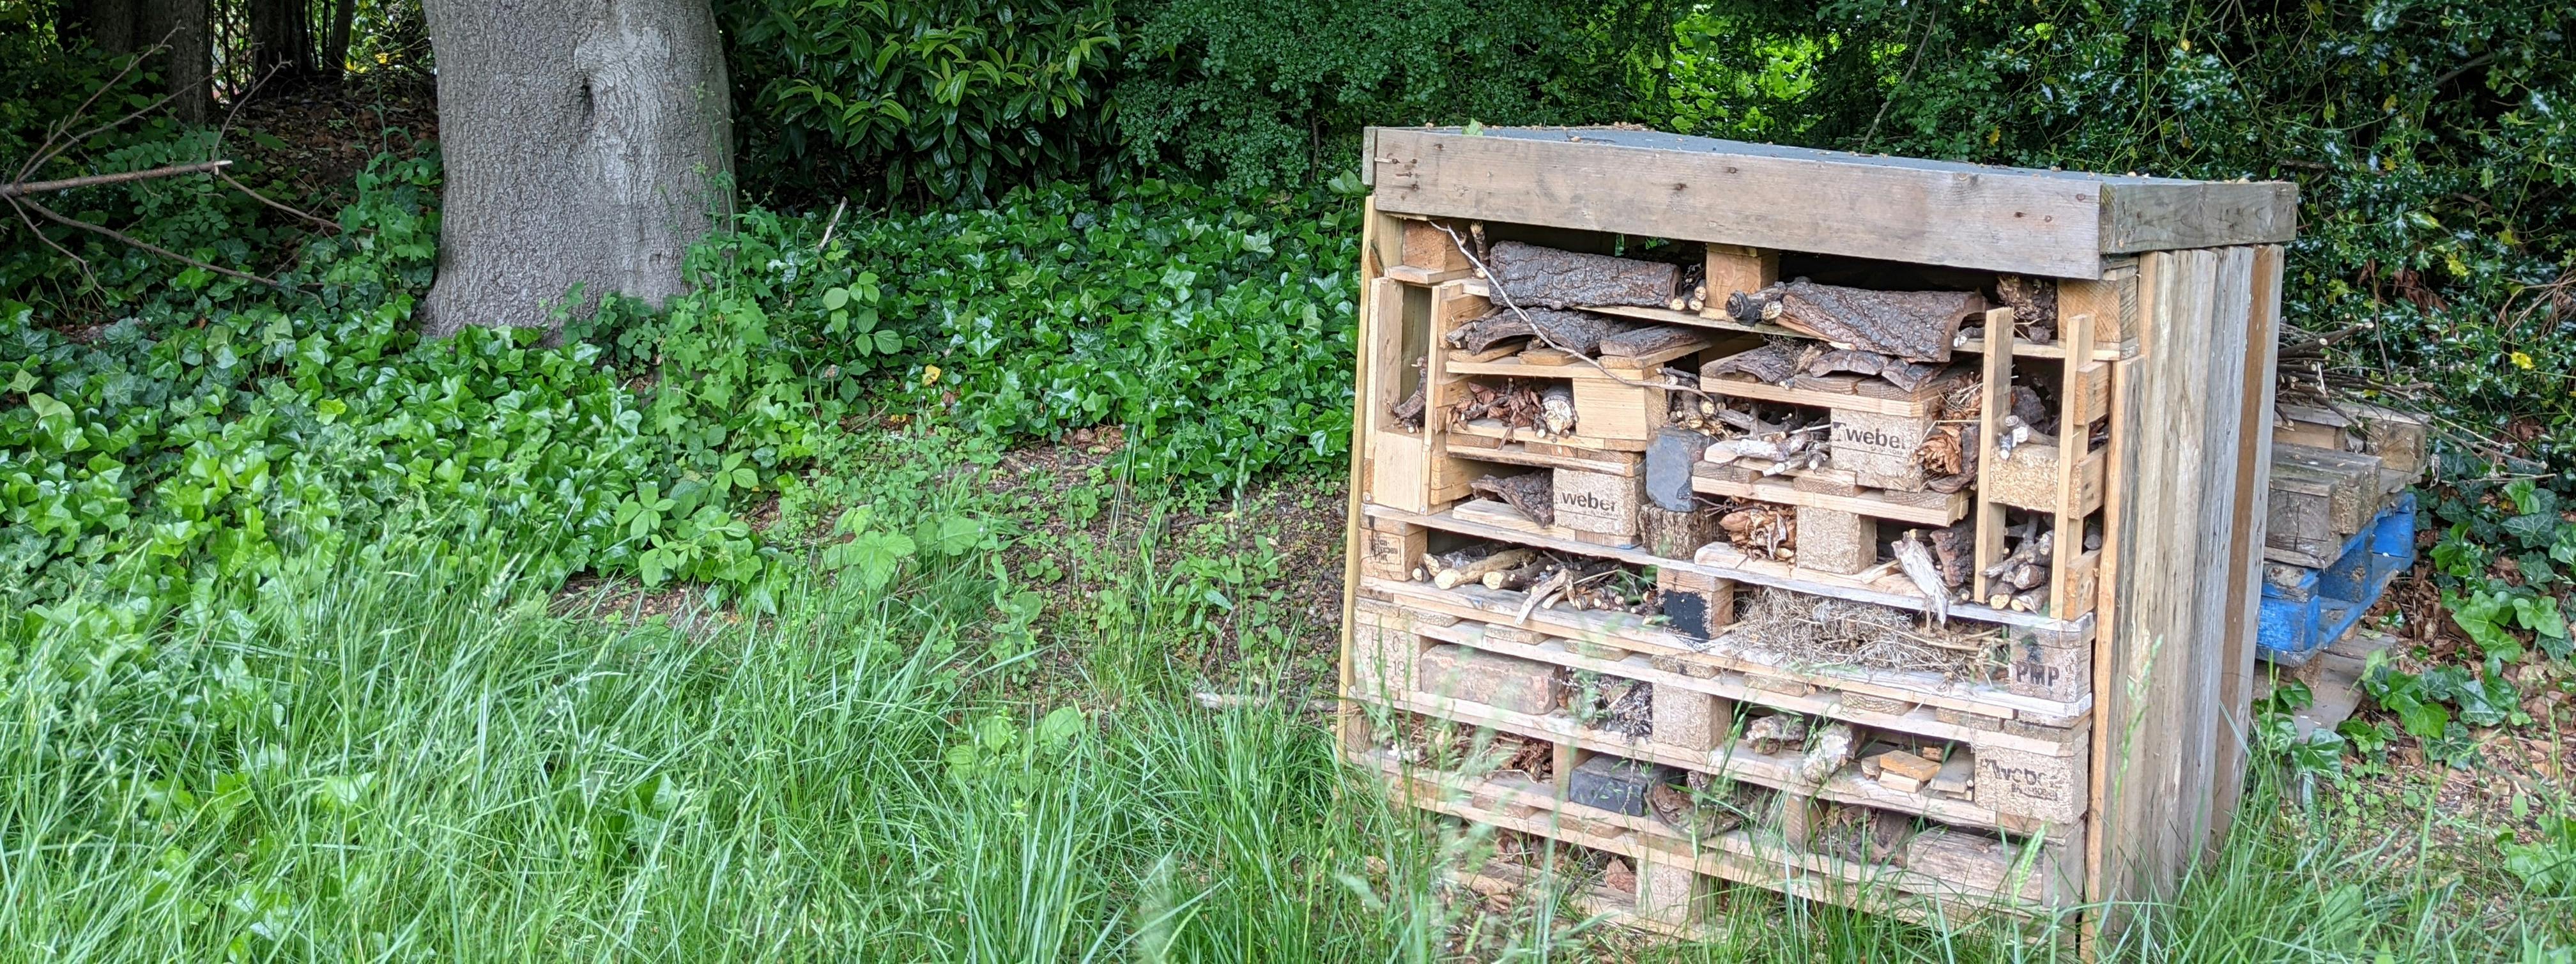 Bug hotel made from pallets with trees behind